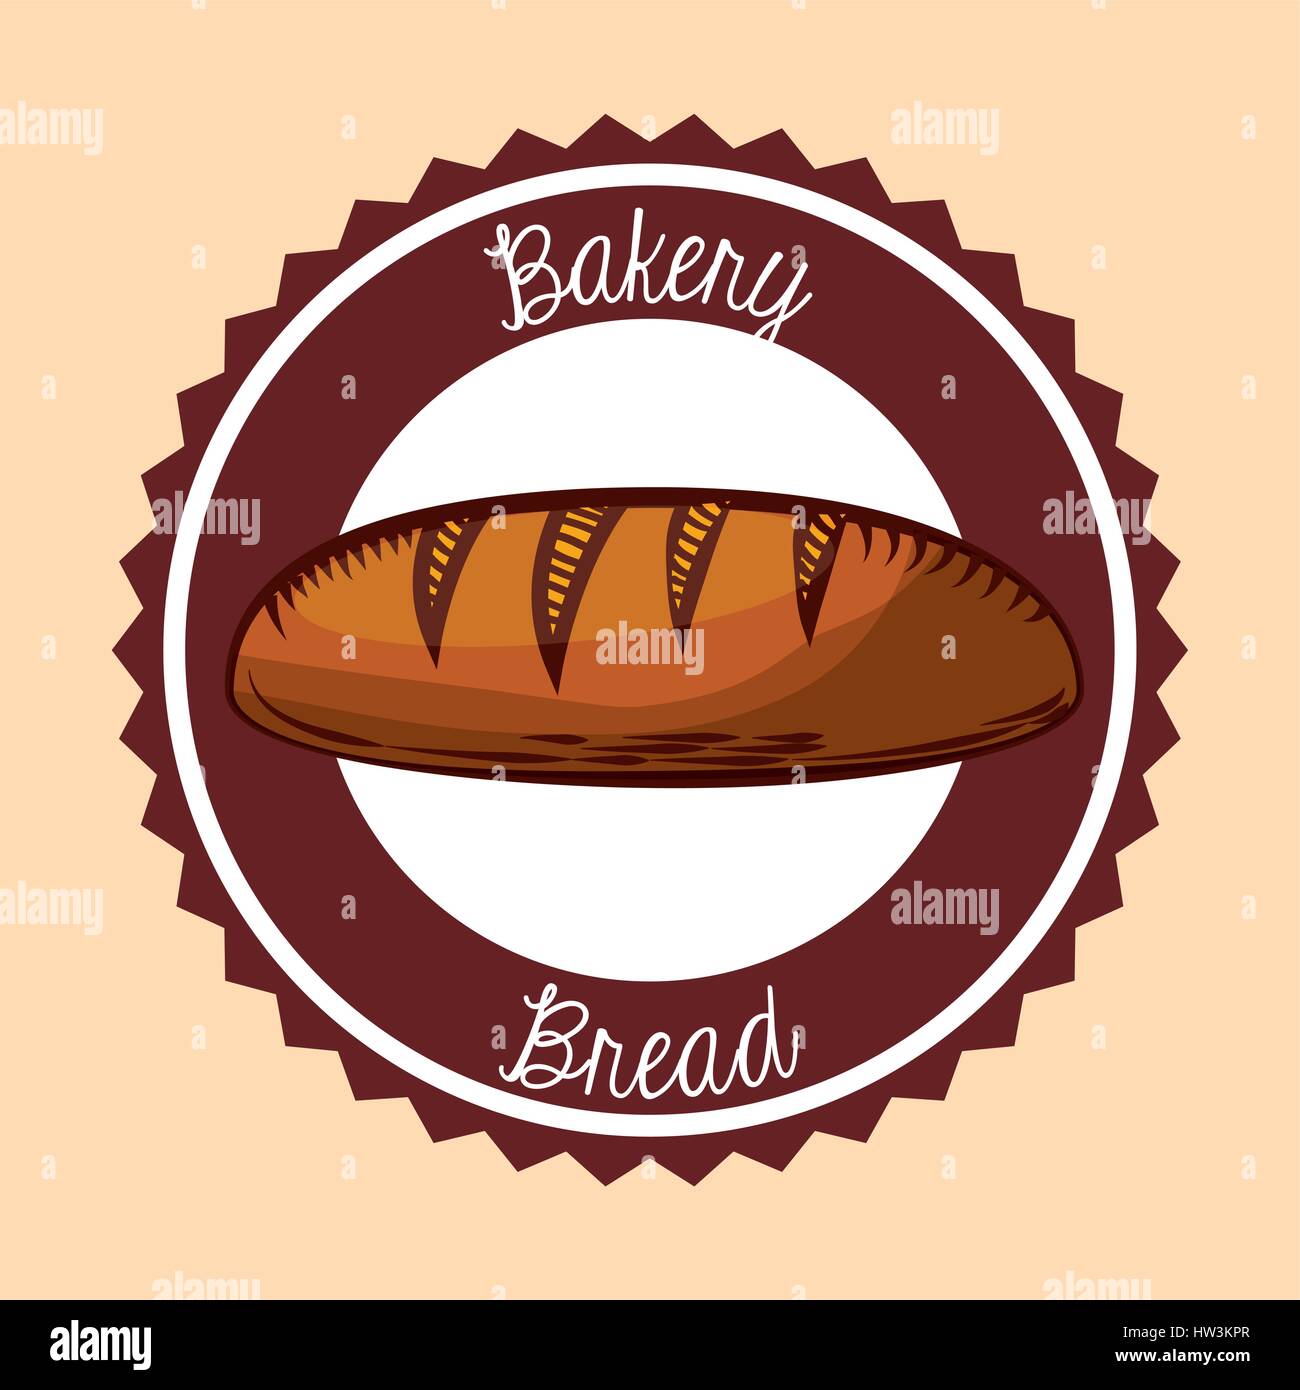 Baked Products Logo